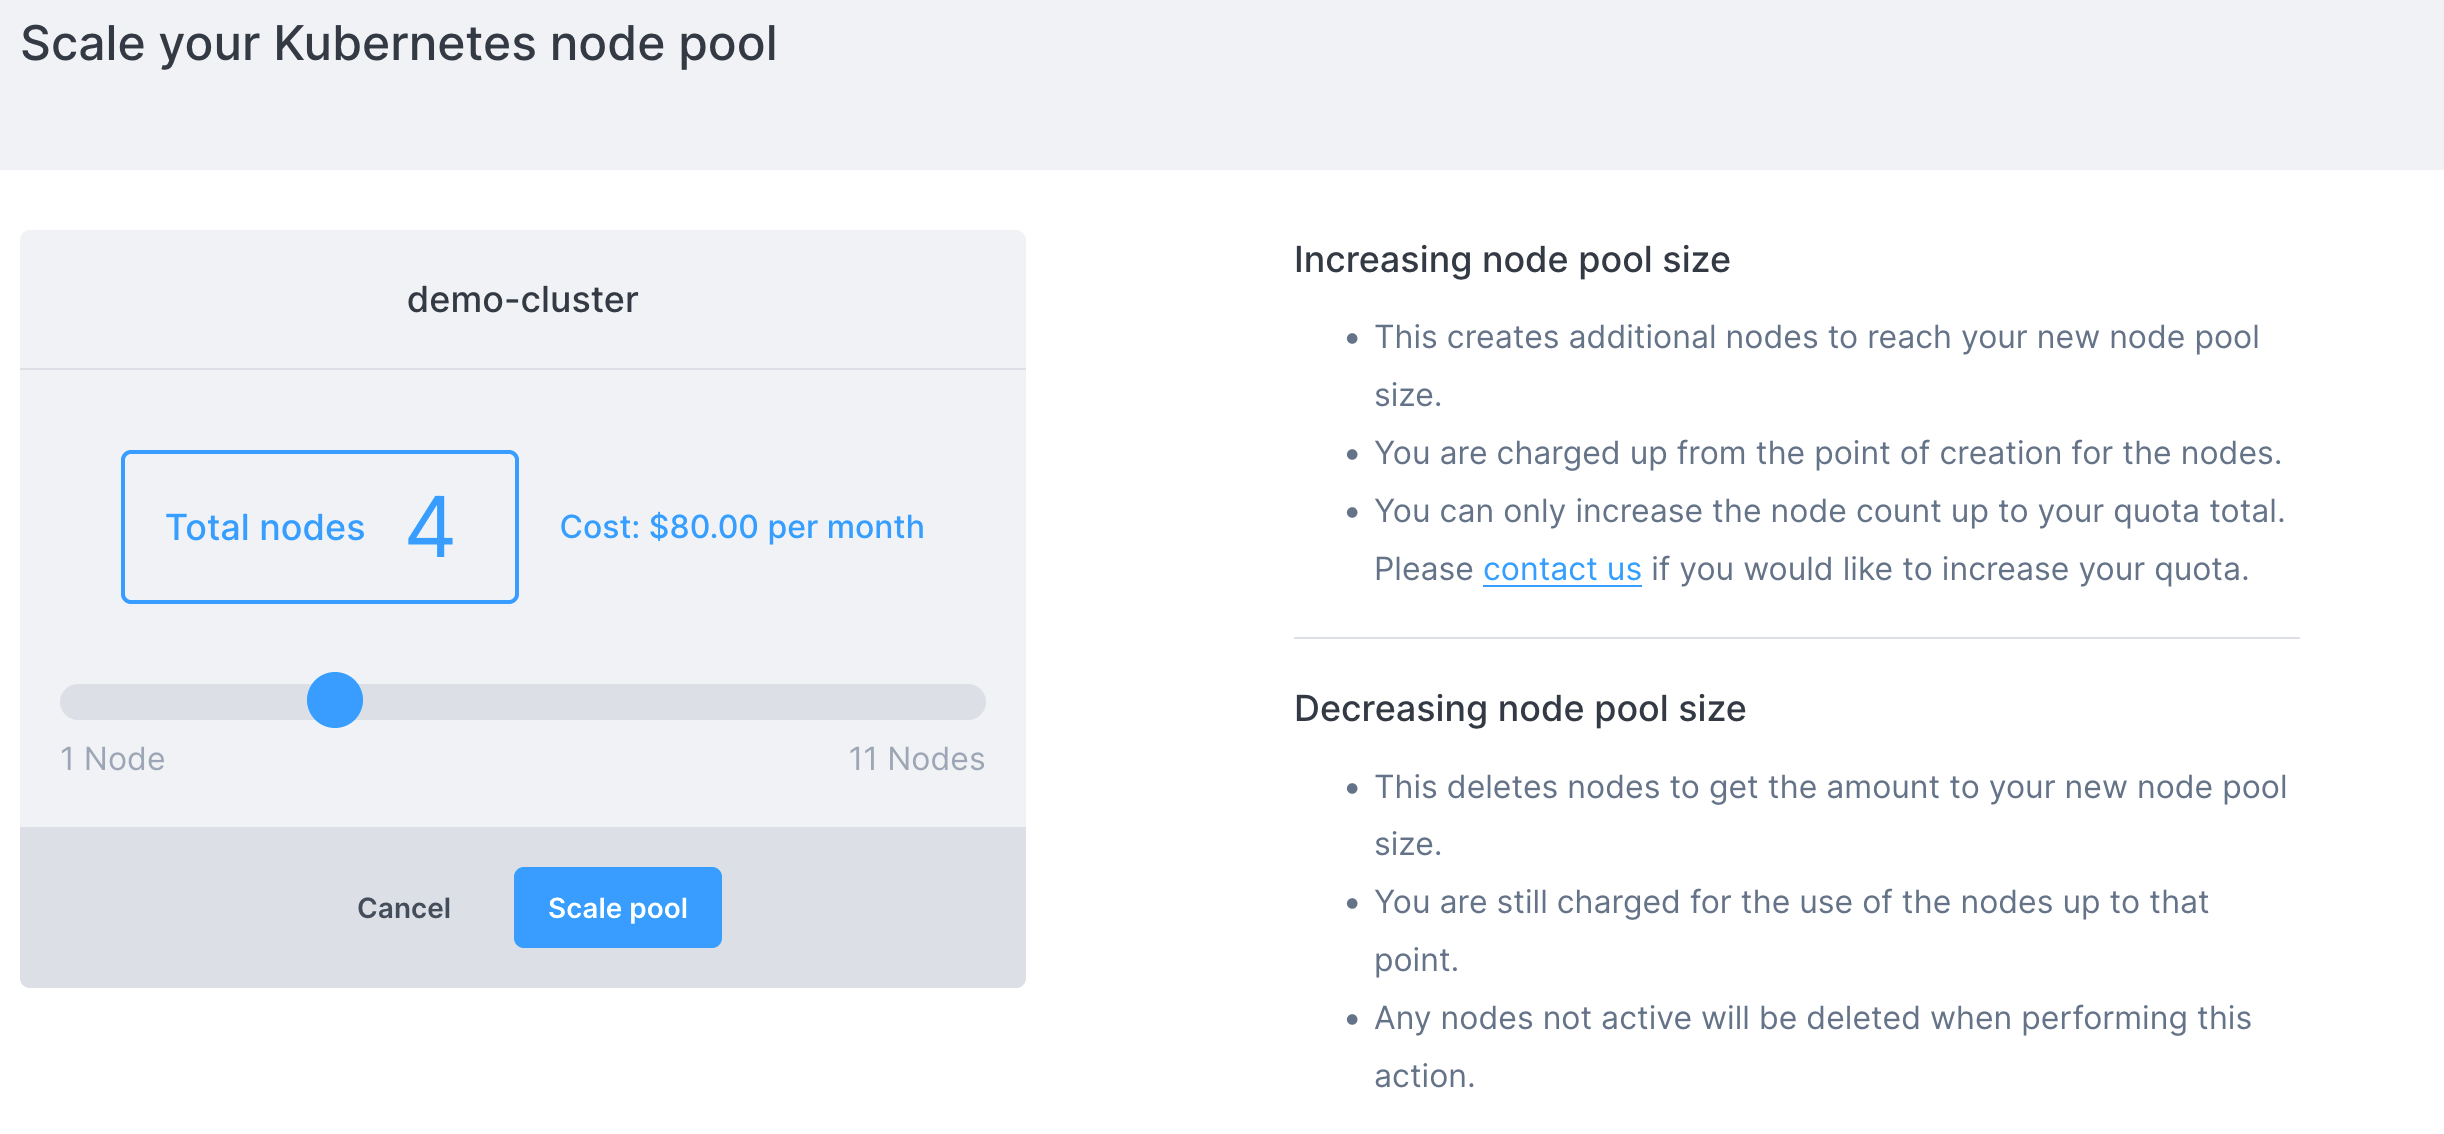 Node pool scale slider page